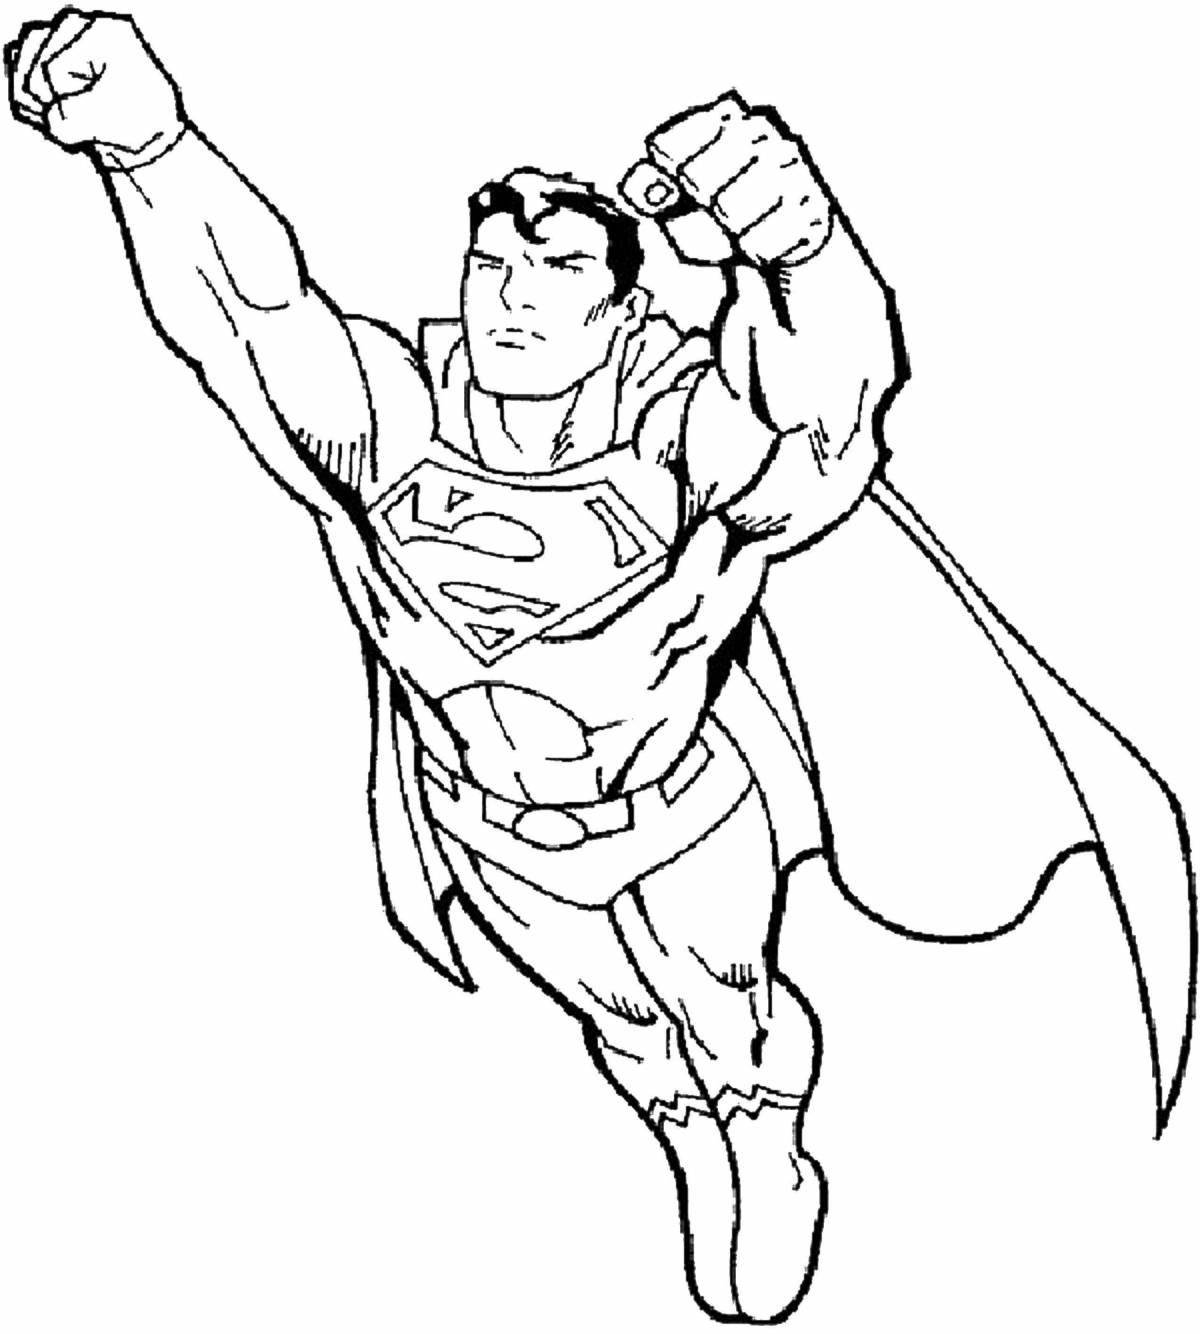 Glorious superheroes coloring for children 5-6 years old